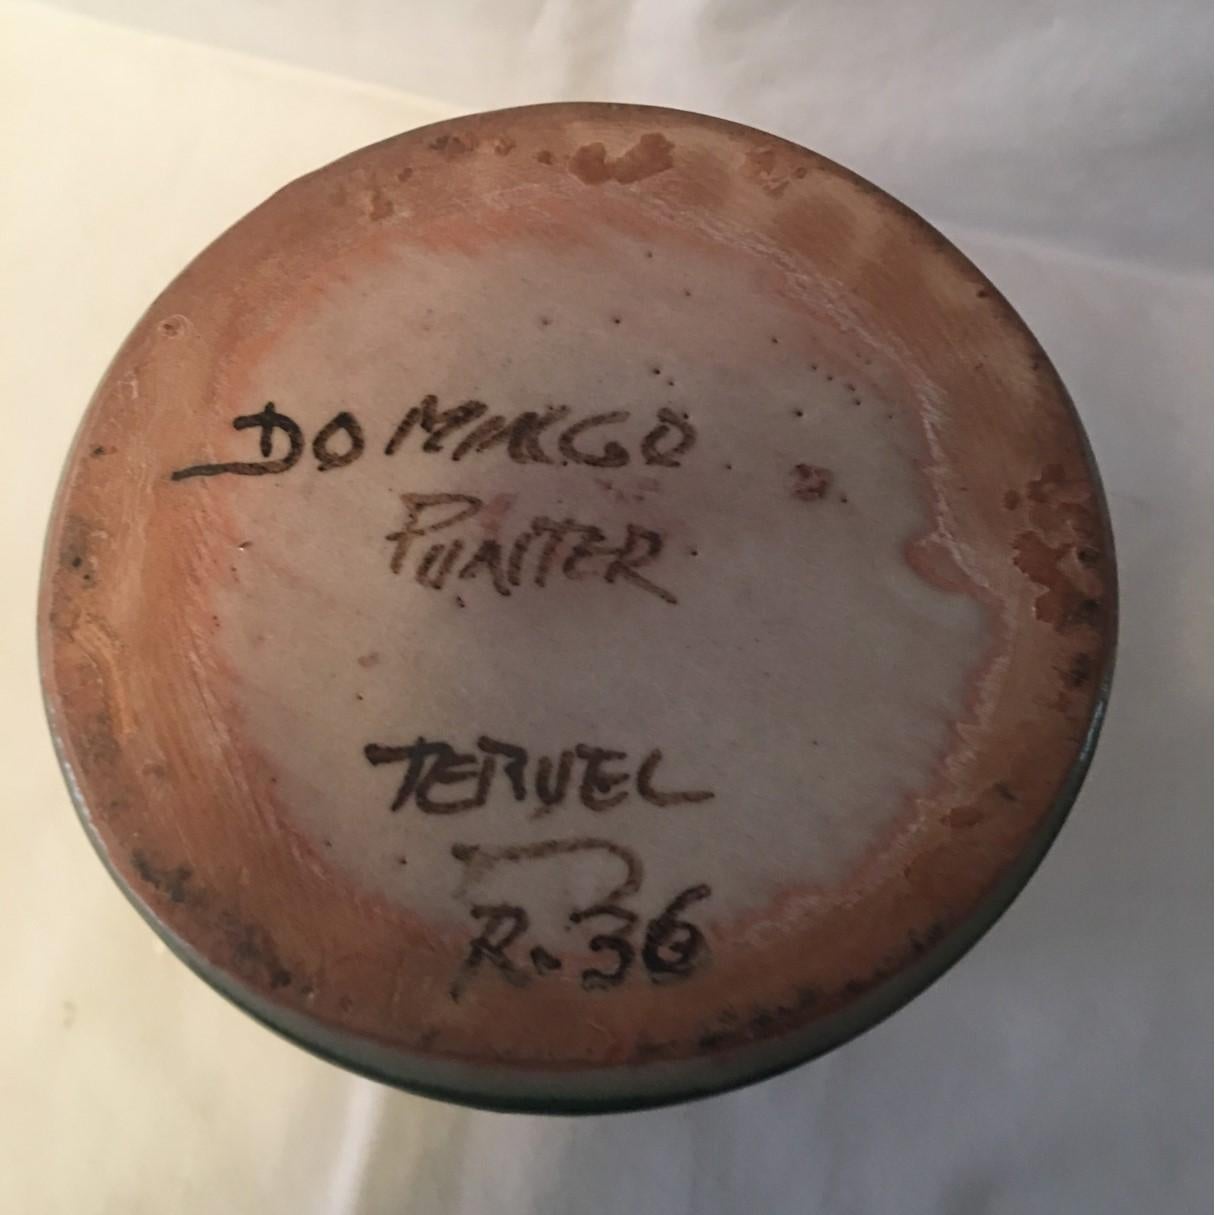 Unique and Powerful Ceramic Pitcher Signed by Domingo Punter of Spain For Sale 5